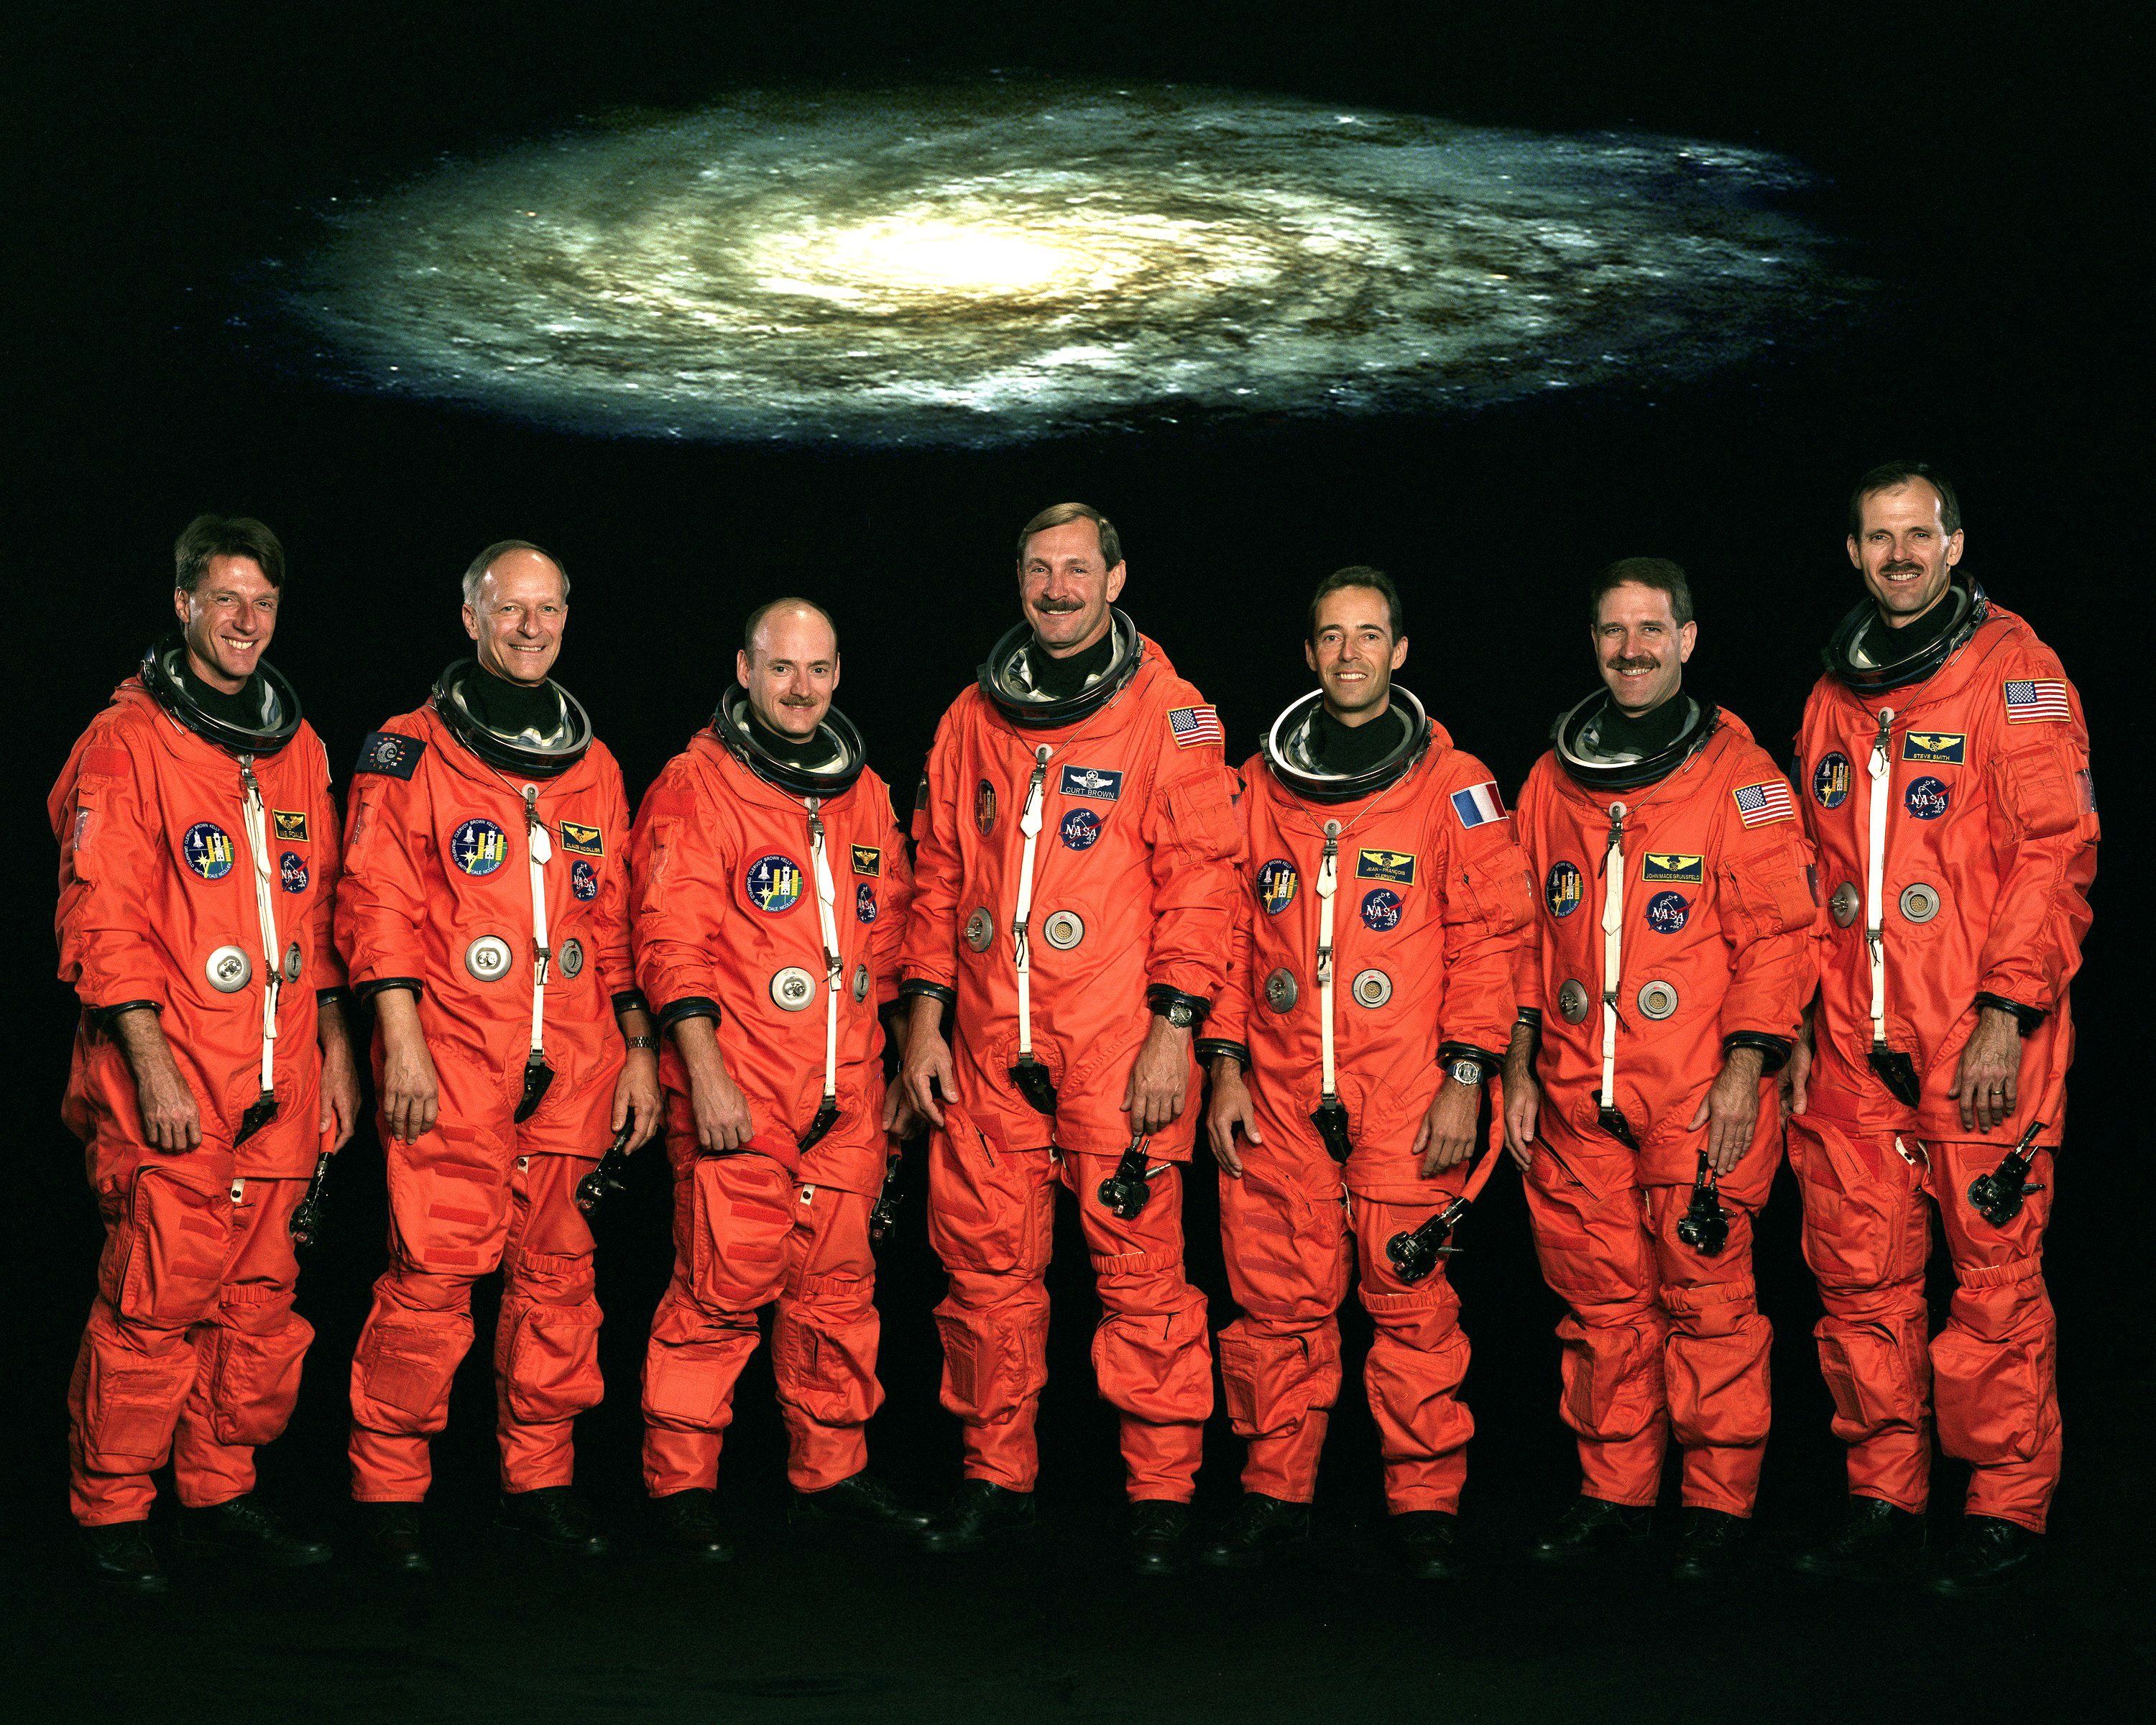 A crew picture of the STS-103 crew in their orange launch suits standing in front of an image of a galaxy.